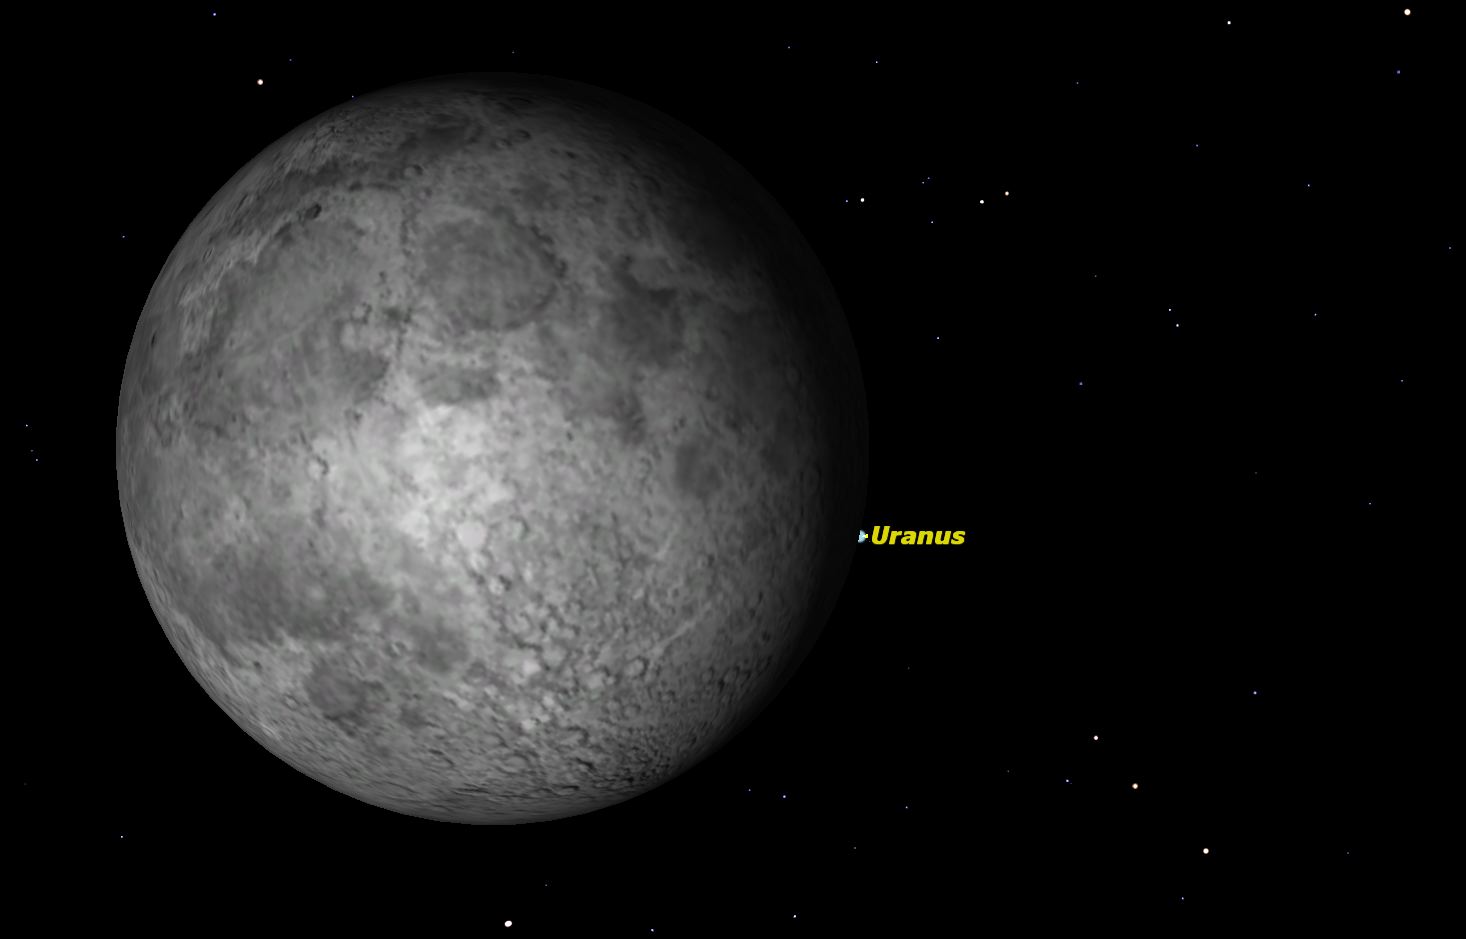 On Wednesday night Uranus plays peek-a-boo with the Moon for observers in the Northeast. Credit: Starry Night Software.